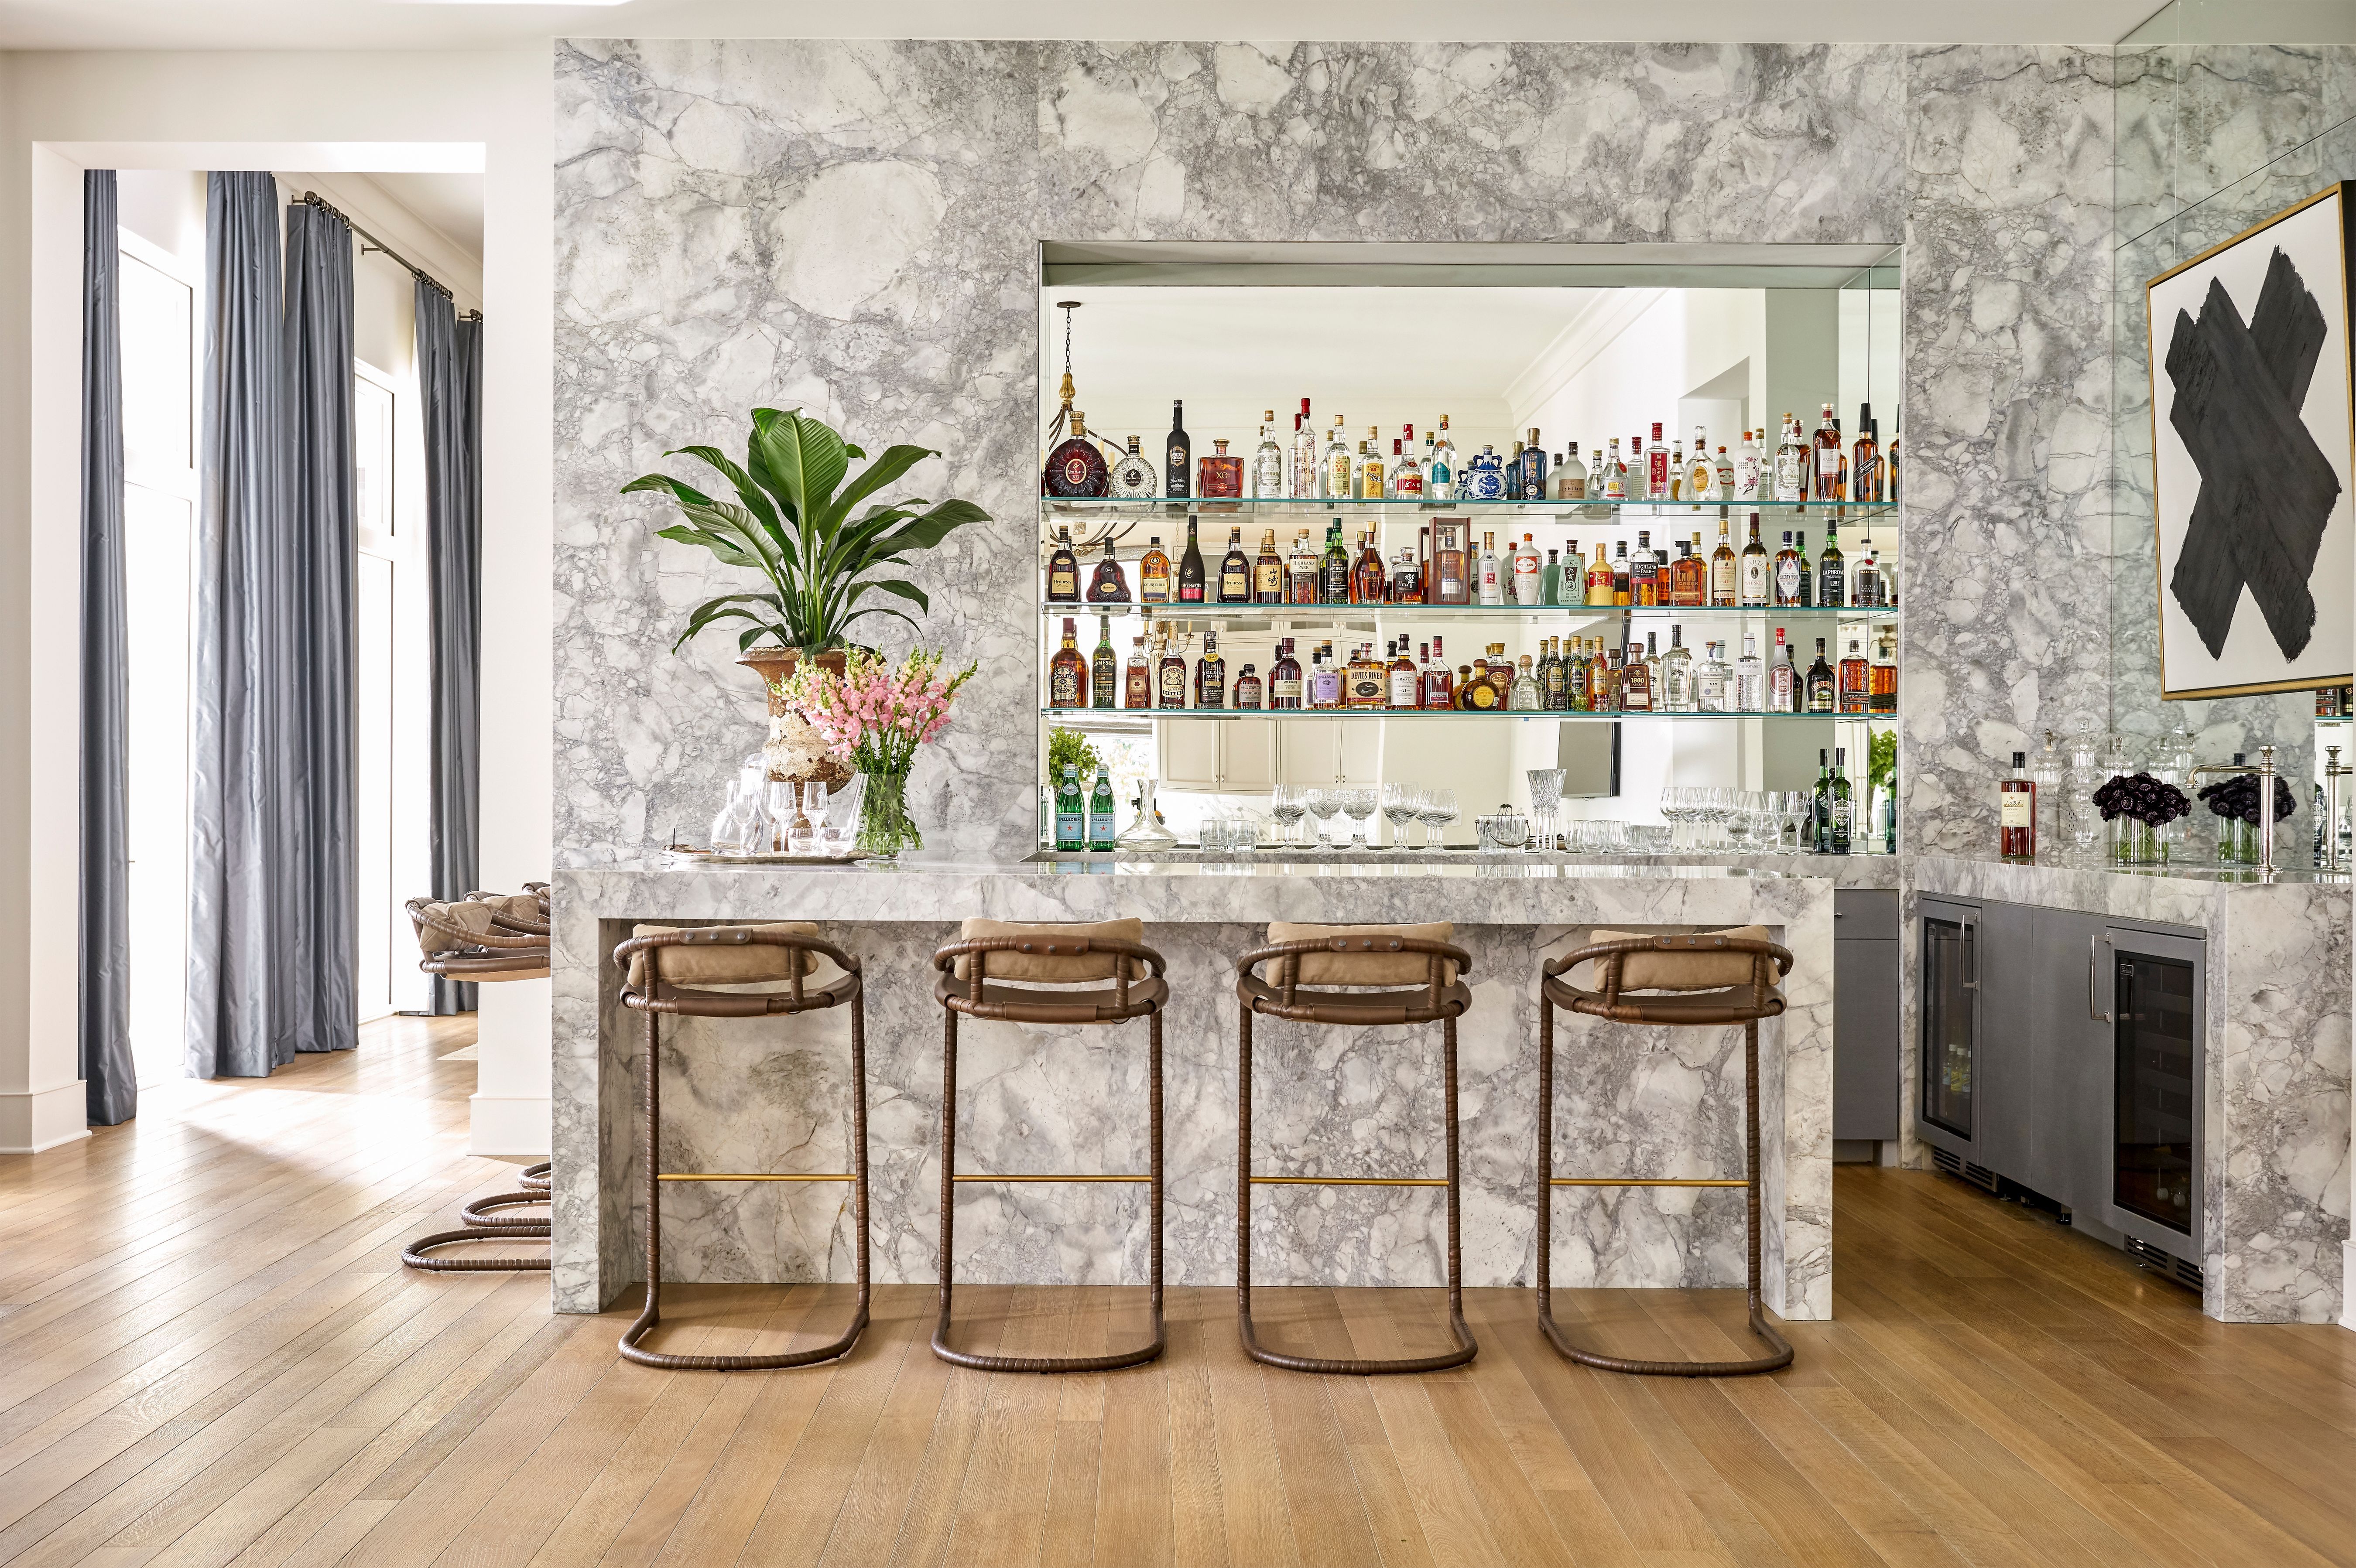 30 Simple Home Bar Ideas on a Budget - Home Bars for Small Spaces